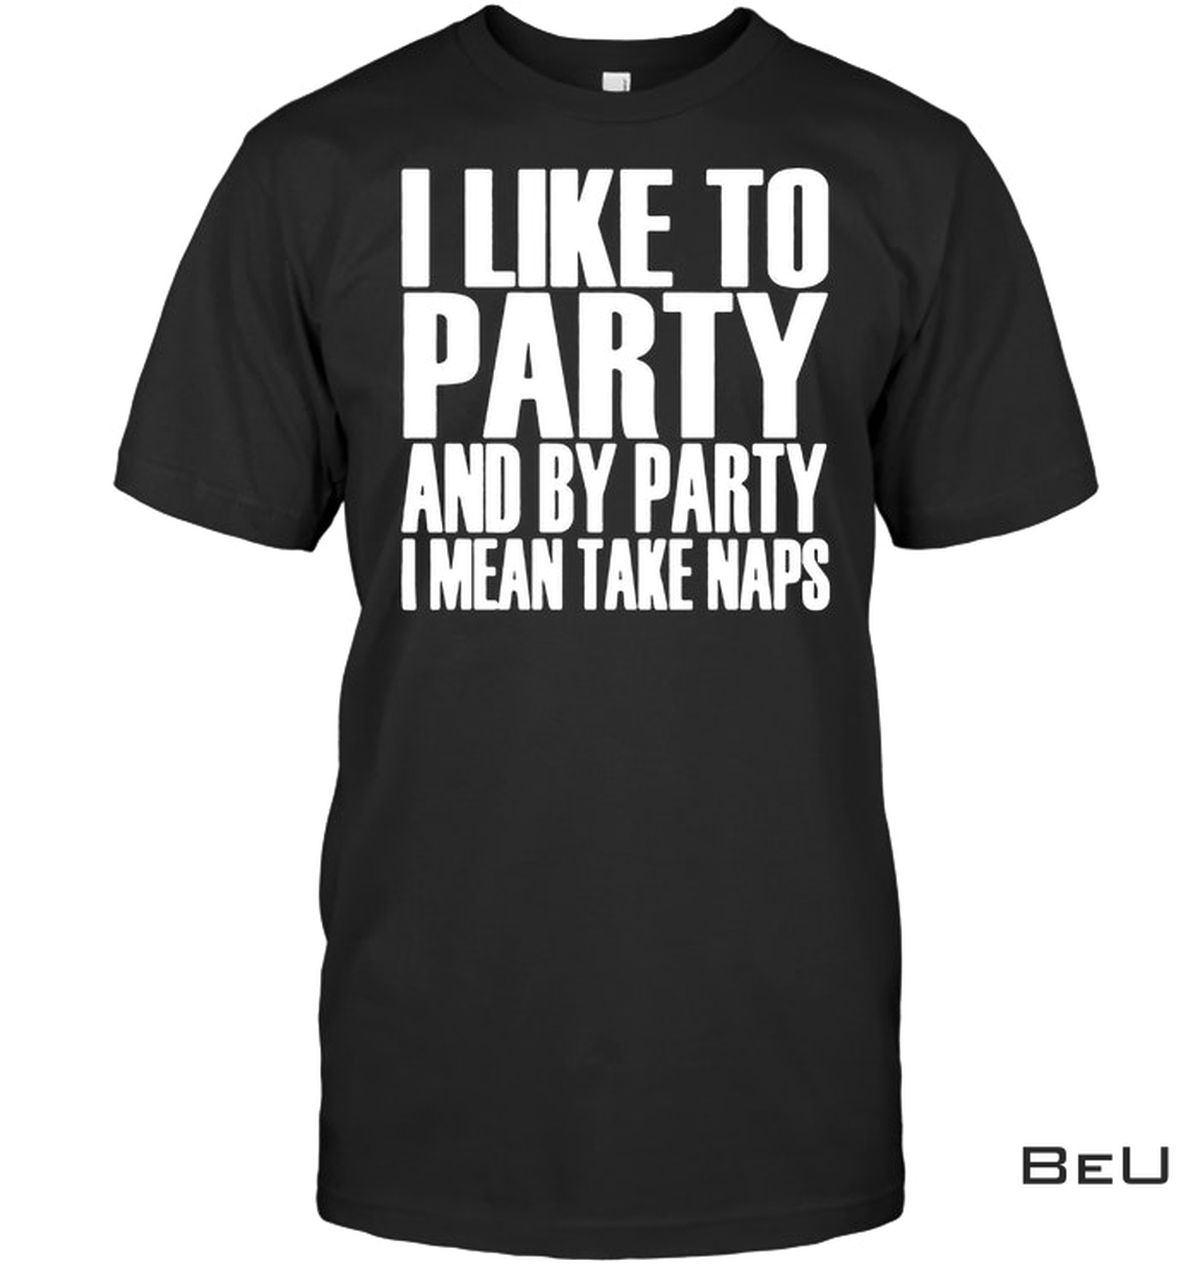 I Like To Party And By Party I Mean Take Naps Shirt